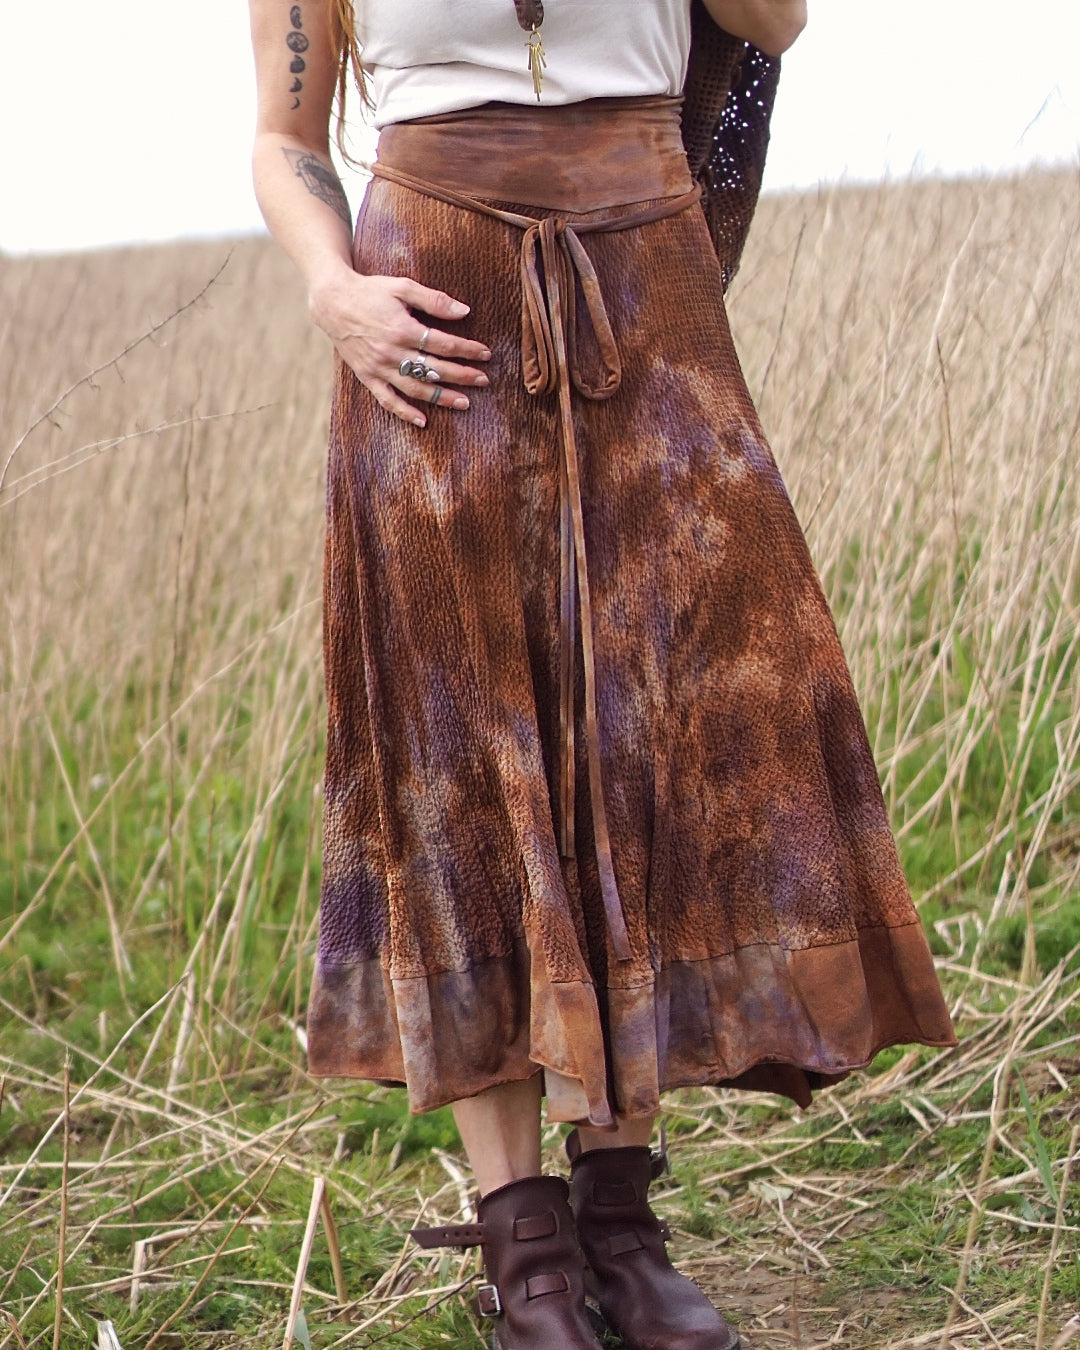 Ella Maxi Dance Skirt - Rusty brown with Lilac